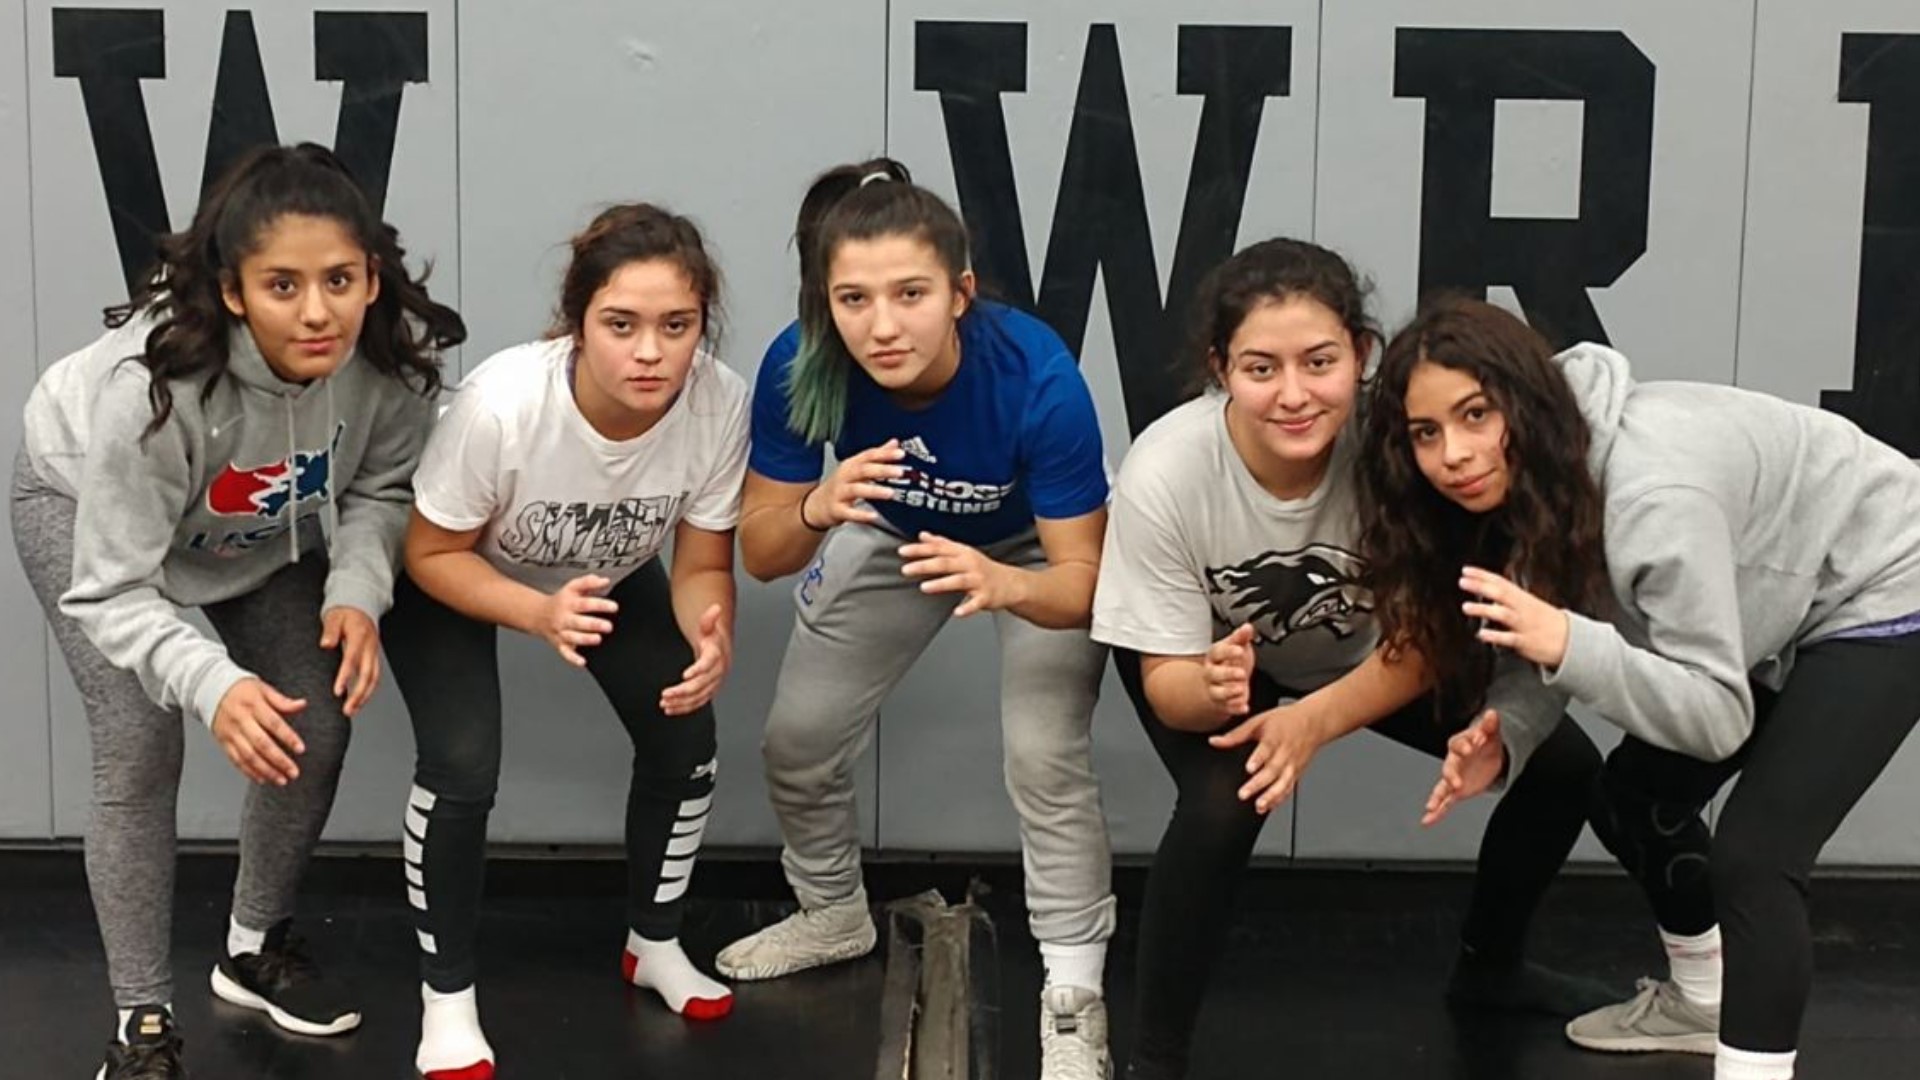 With Mapleton School athletics still sidelined since the start of the 2020-21 year, the Skyview girls wrestling team is in jeopardy of missing their inaugural season